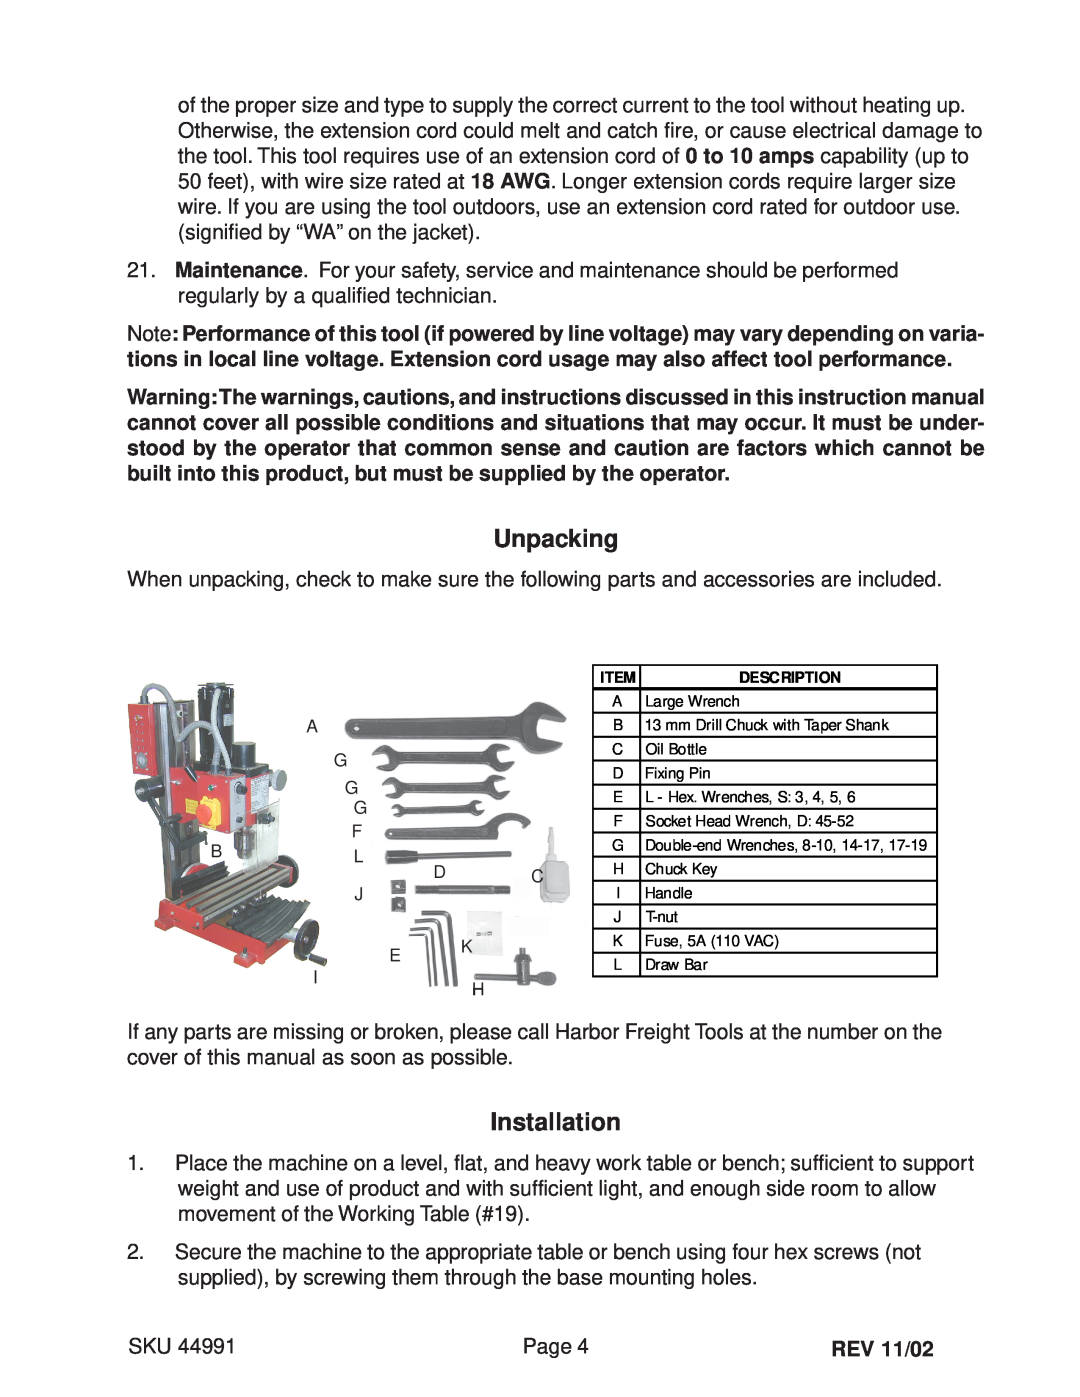 Harbor Freight Tools 44991 operating instructions Unpacking, Installation, REV 11/02 